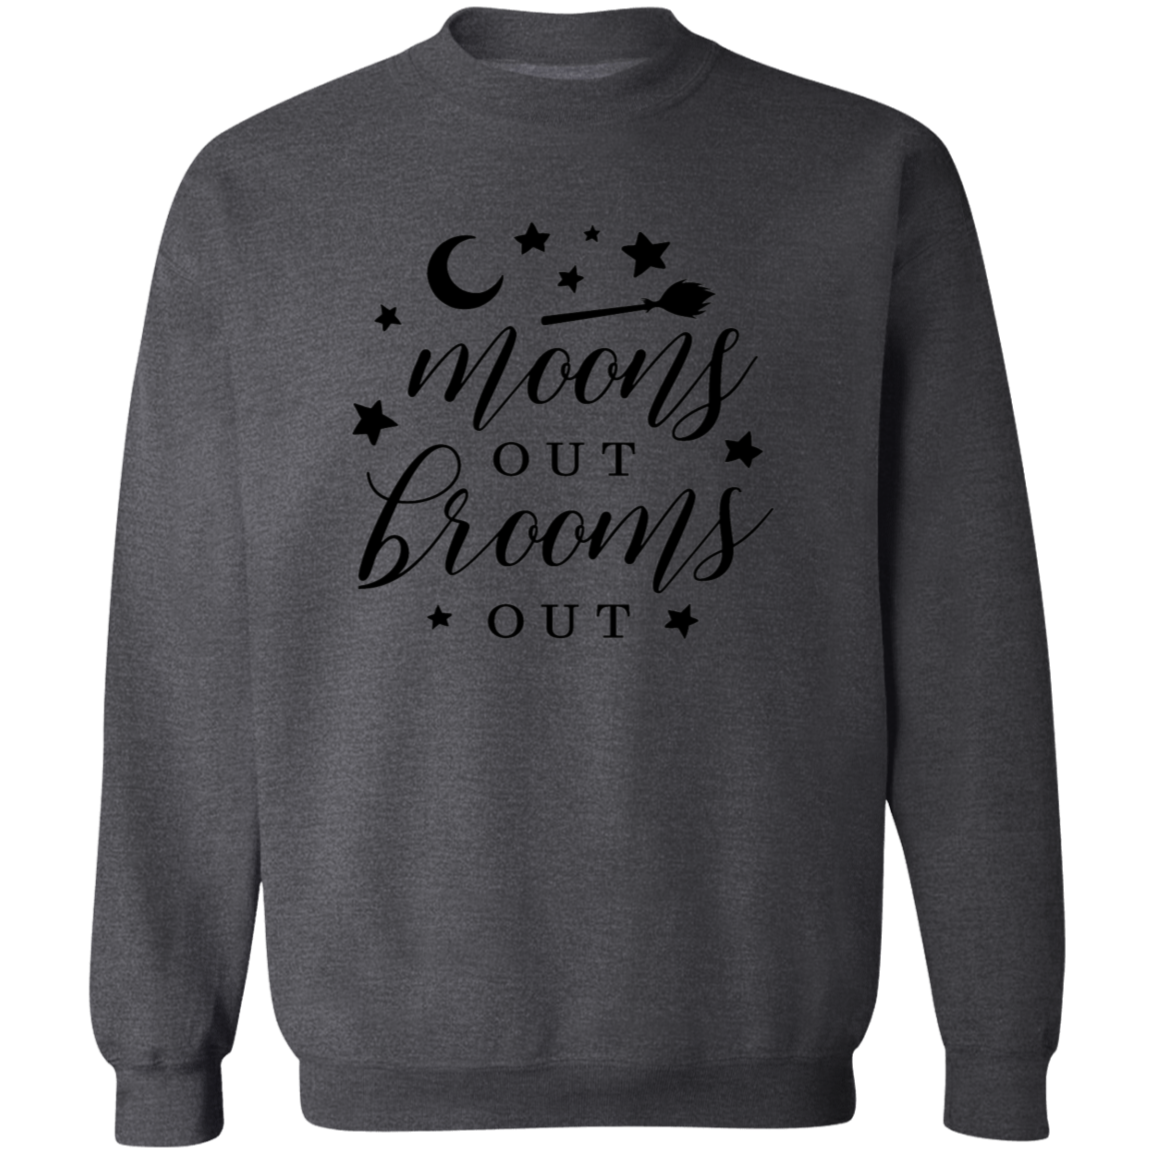 Moons Out Brooms Out Sweatshirt